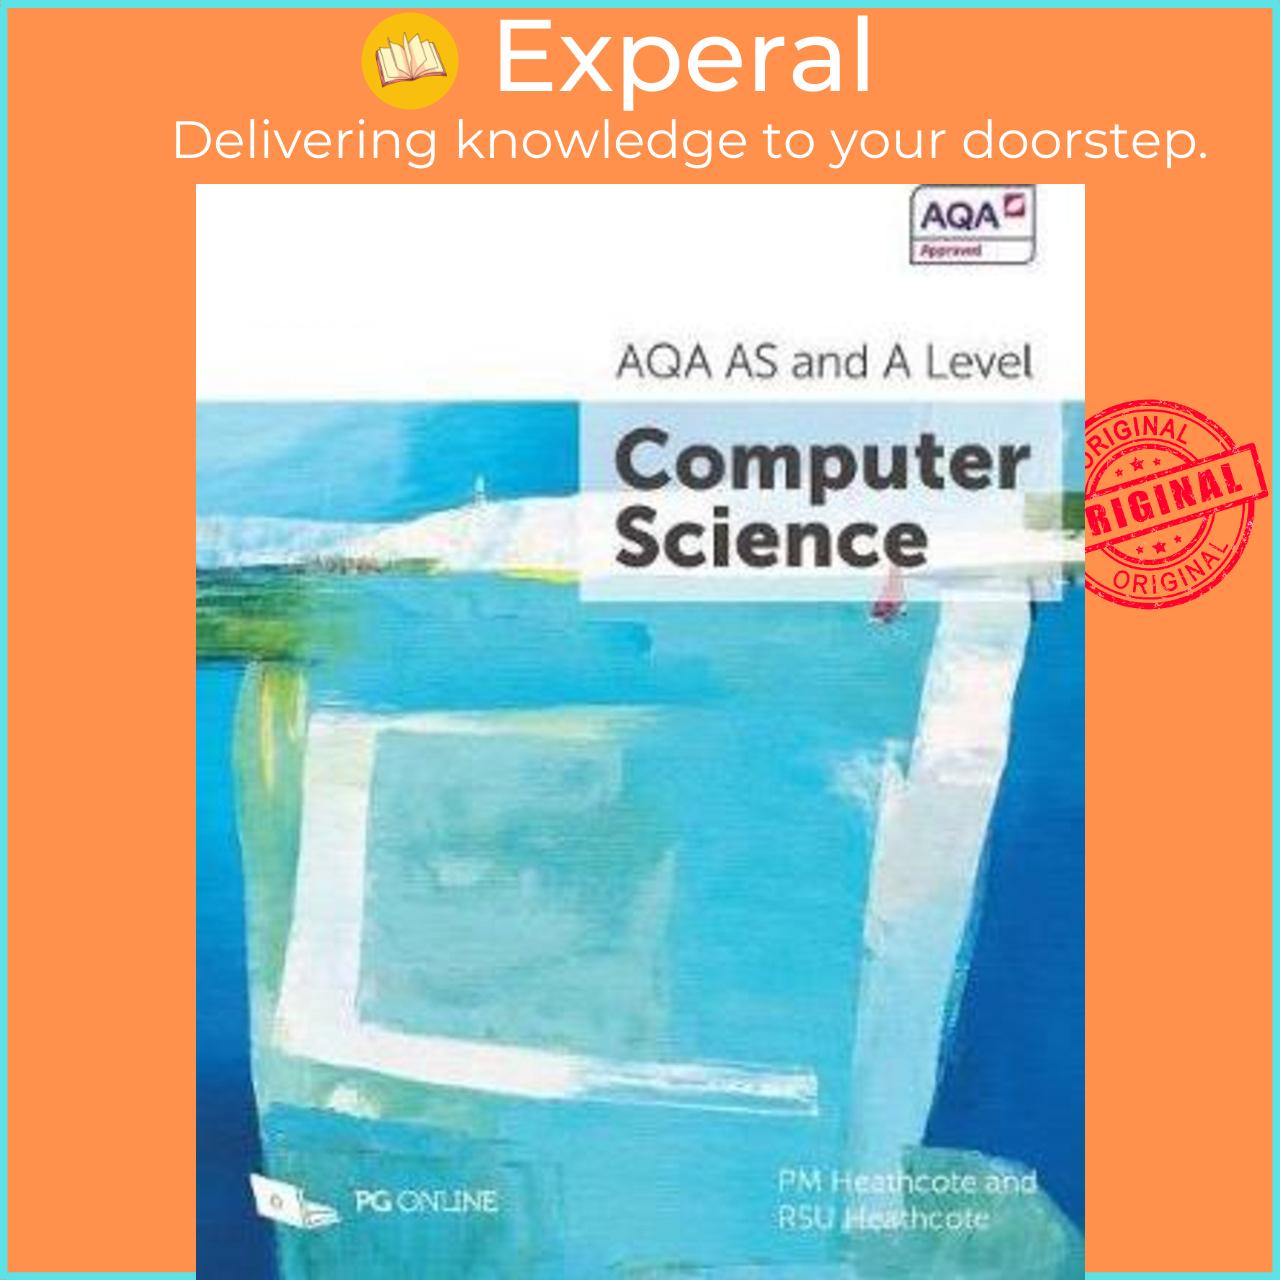 Sách - AQA AS and A Level Computer Science by Pm Heathcote (UK edition, paperback)